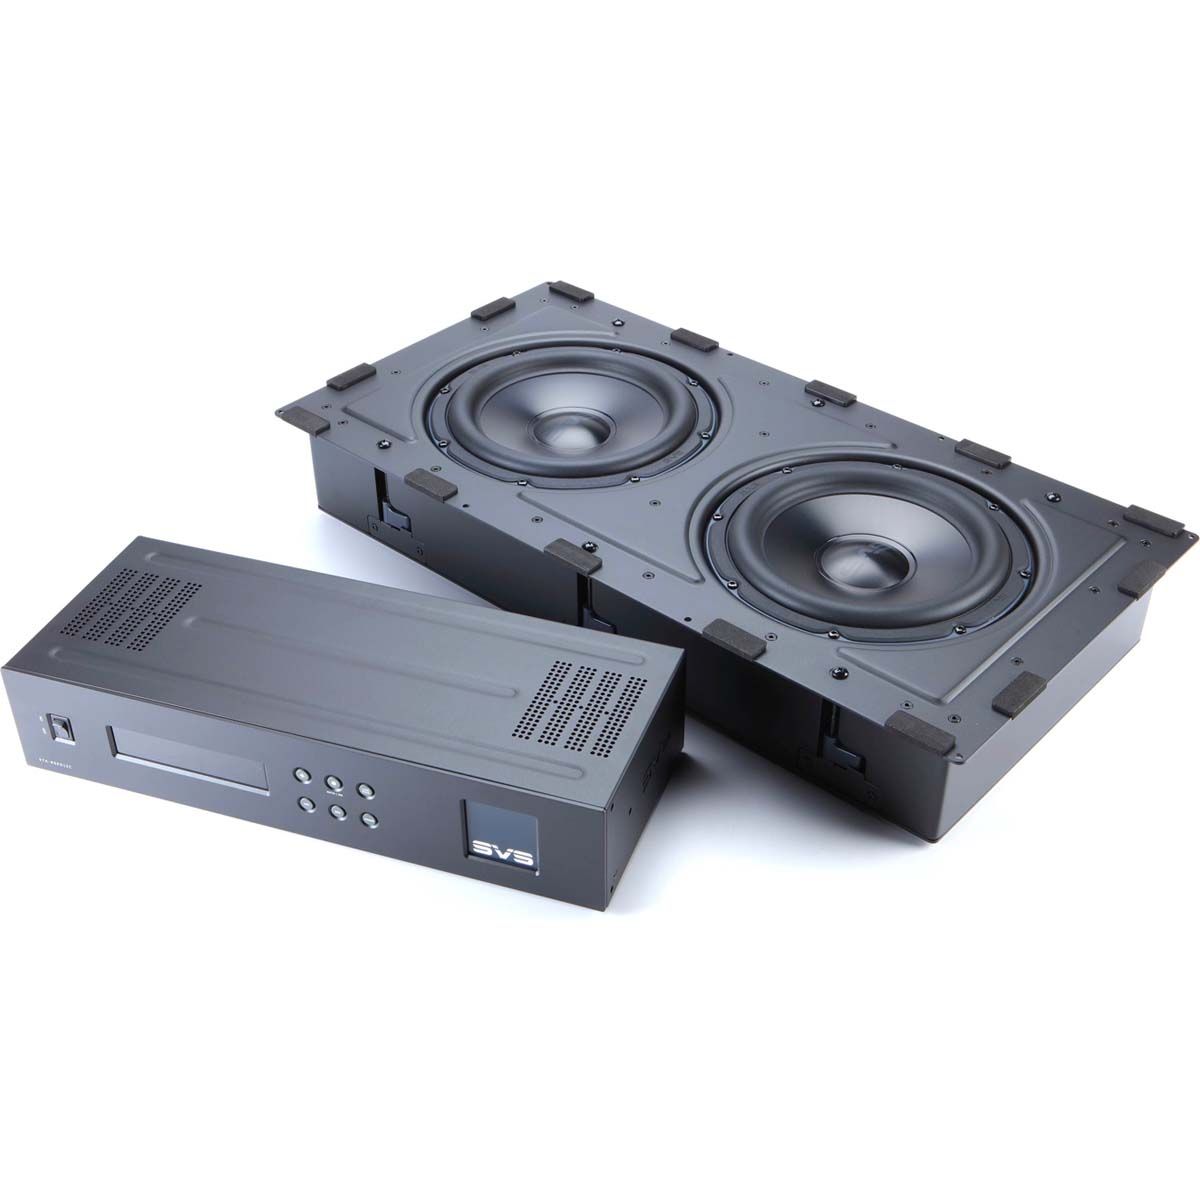 SVS 3000 In-Wall Subwoofer angled side view of front and back of enclosure